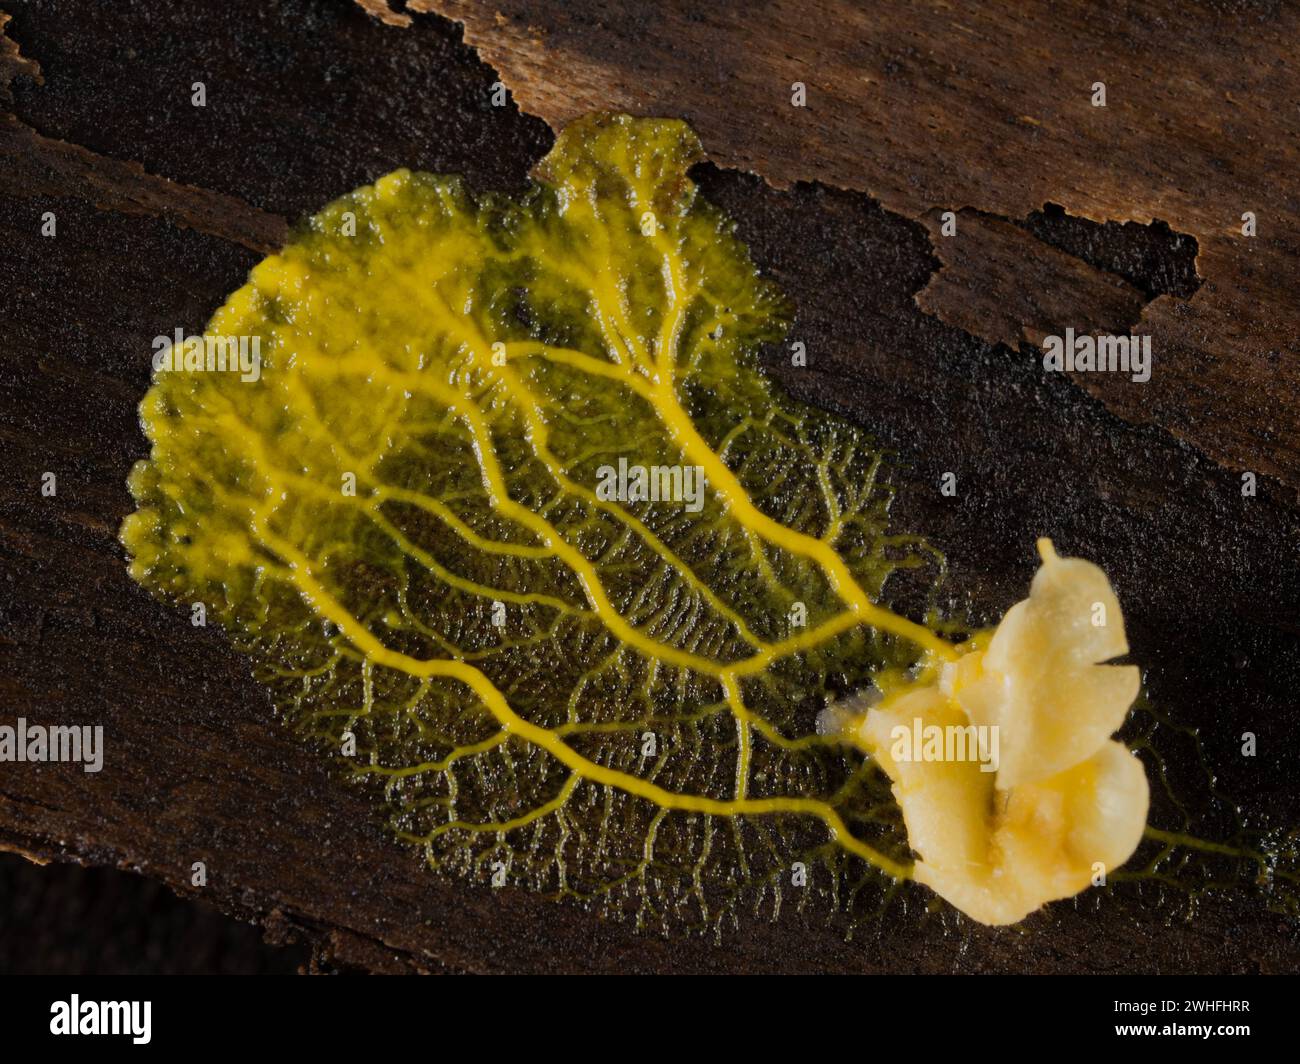 yellow plasmodium of a slime mold (Badhamia utricularis) speading away from rolled oats it had been feeding on Stock Photo